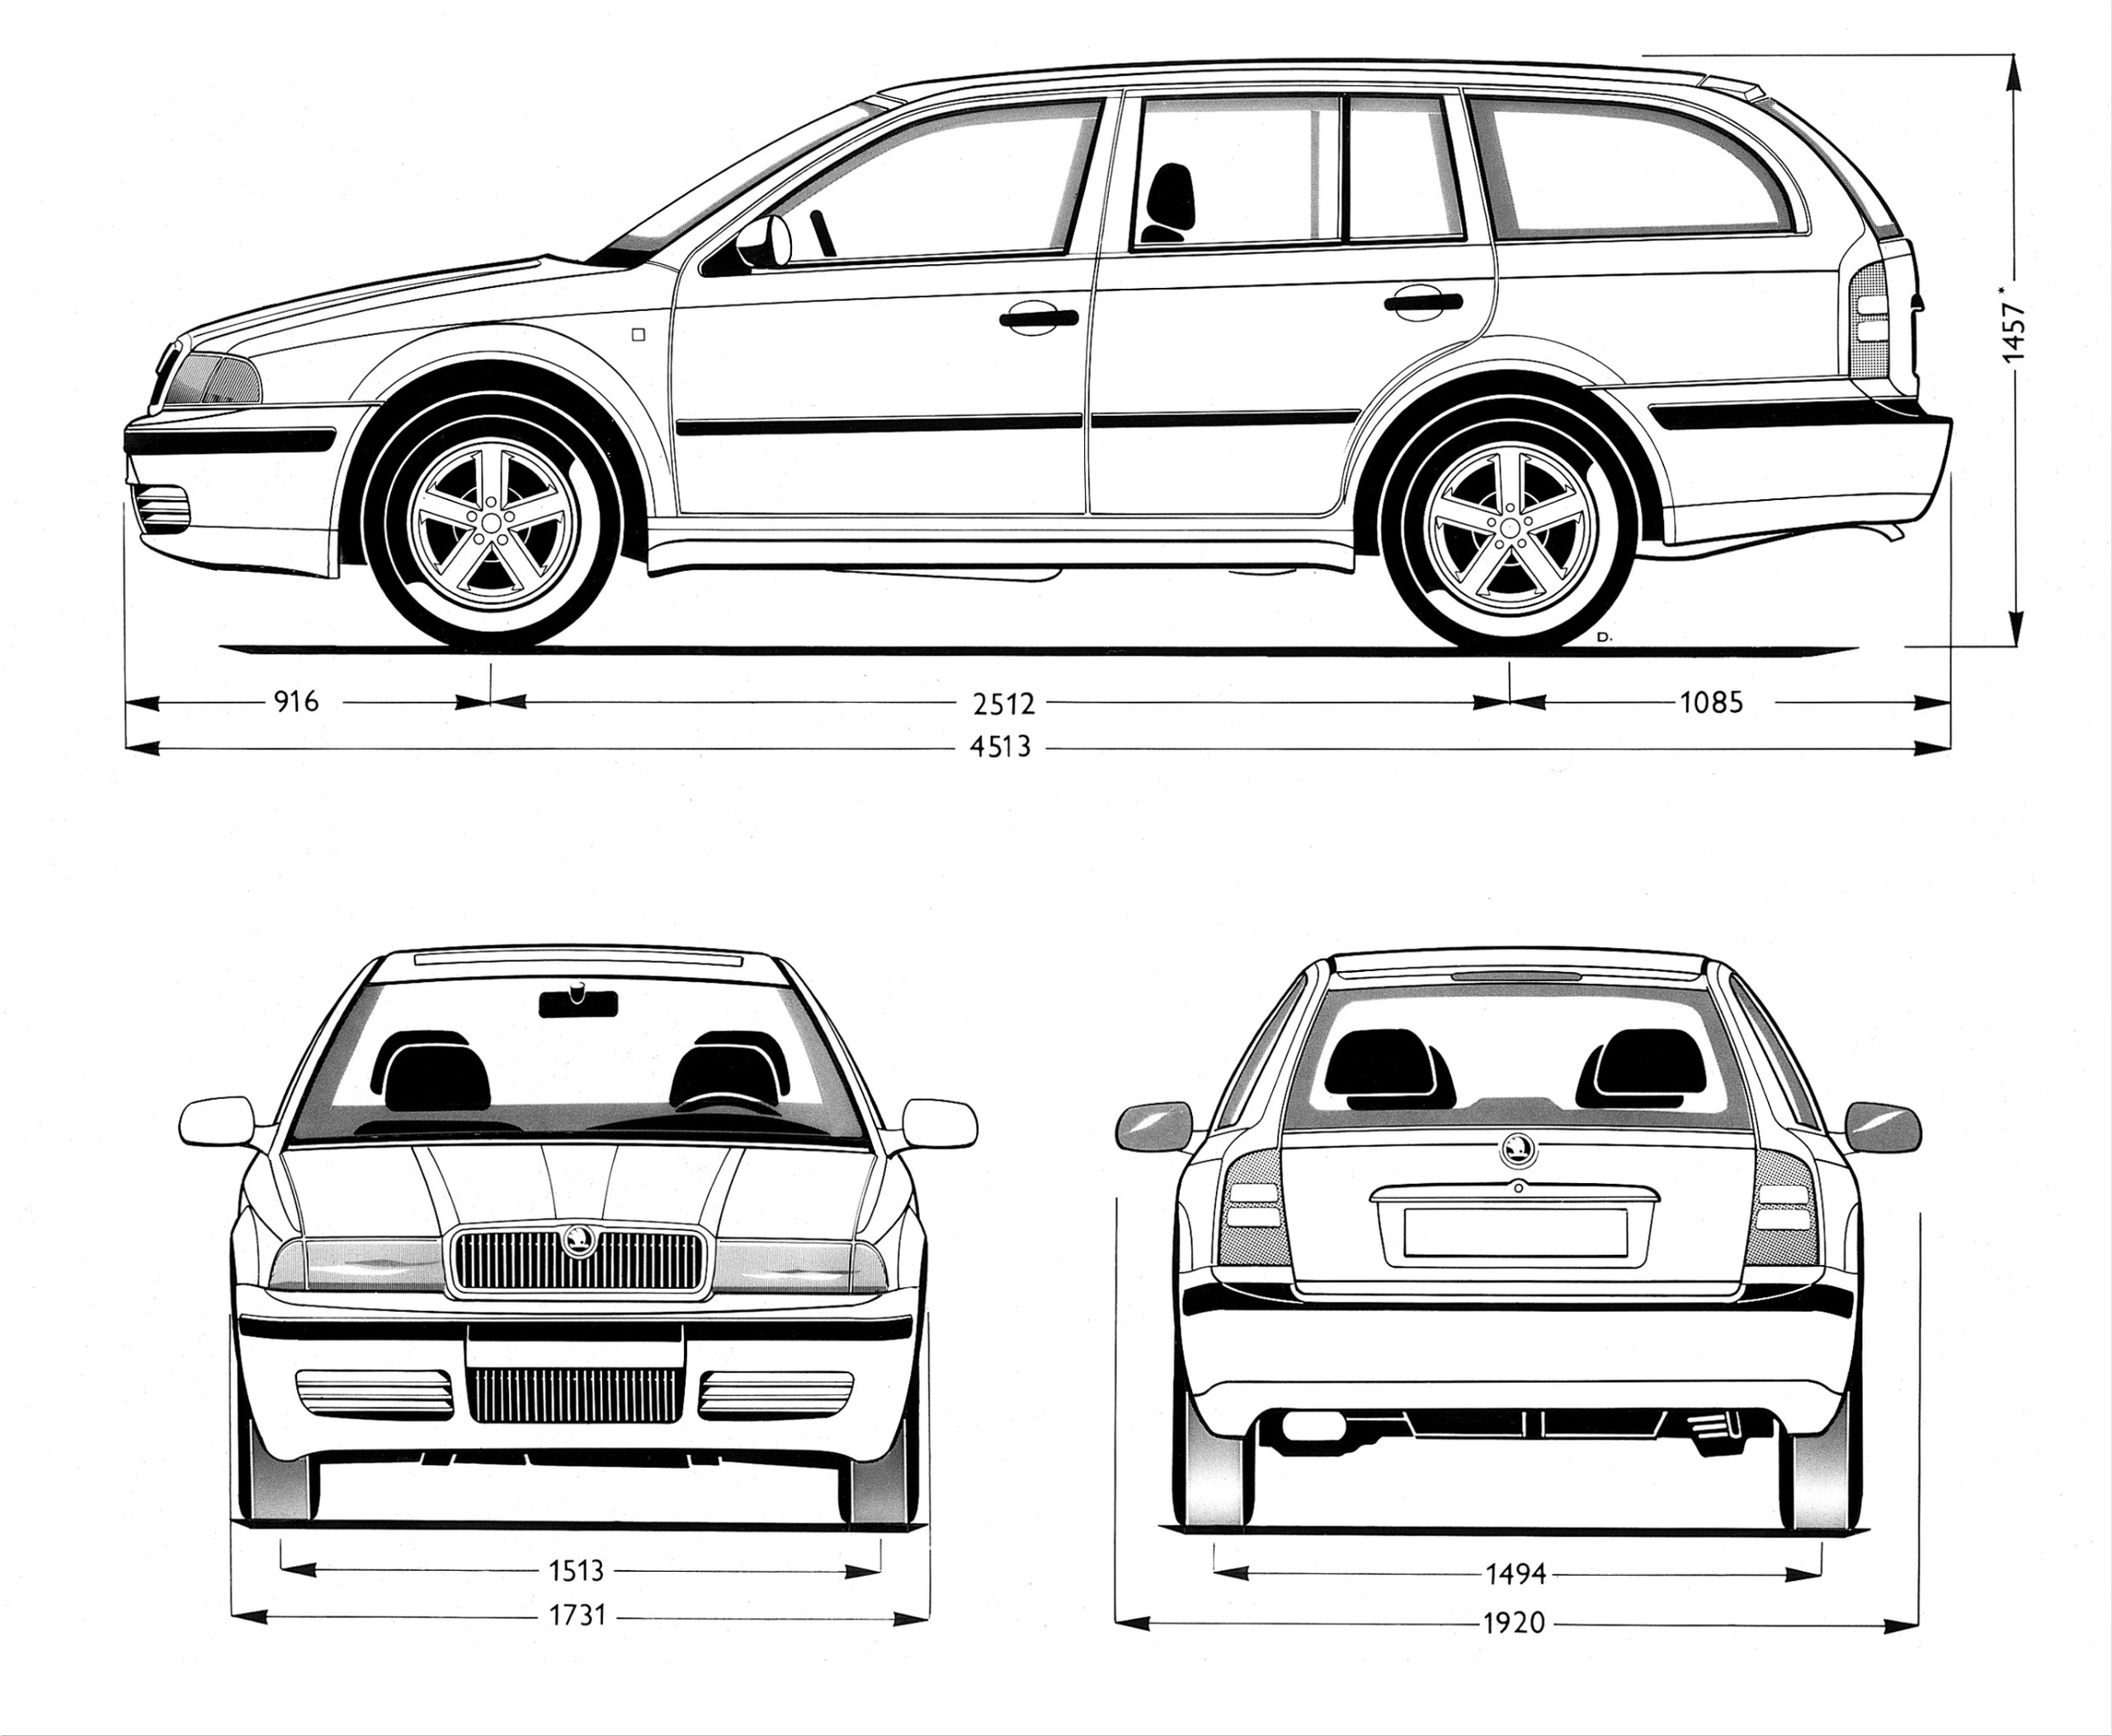 Skoda Octavia dimensions, boot space and electrification